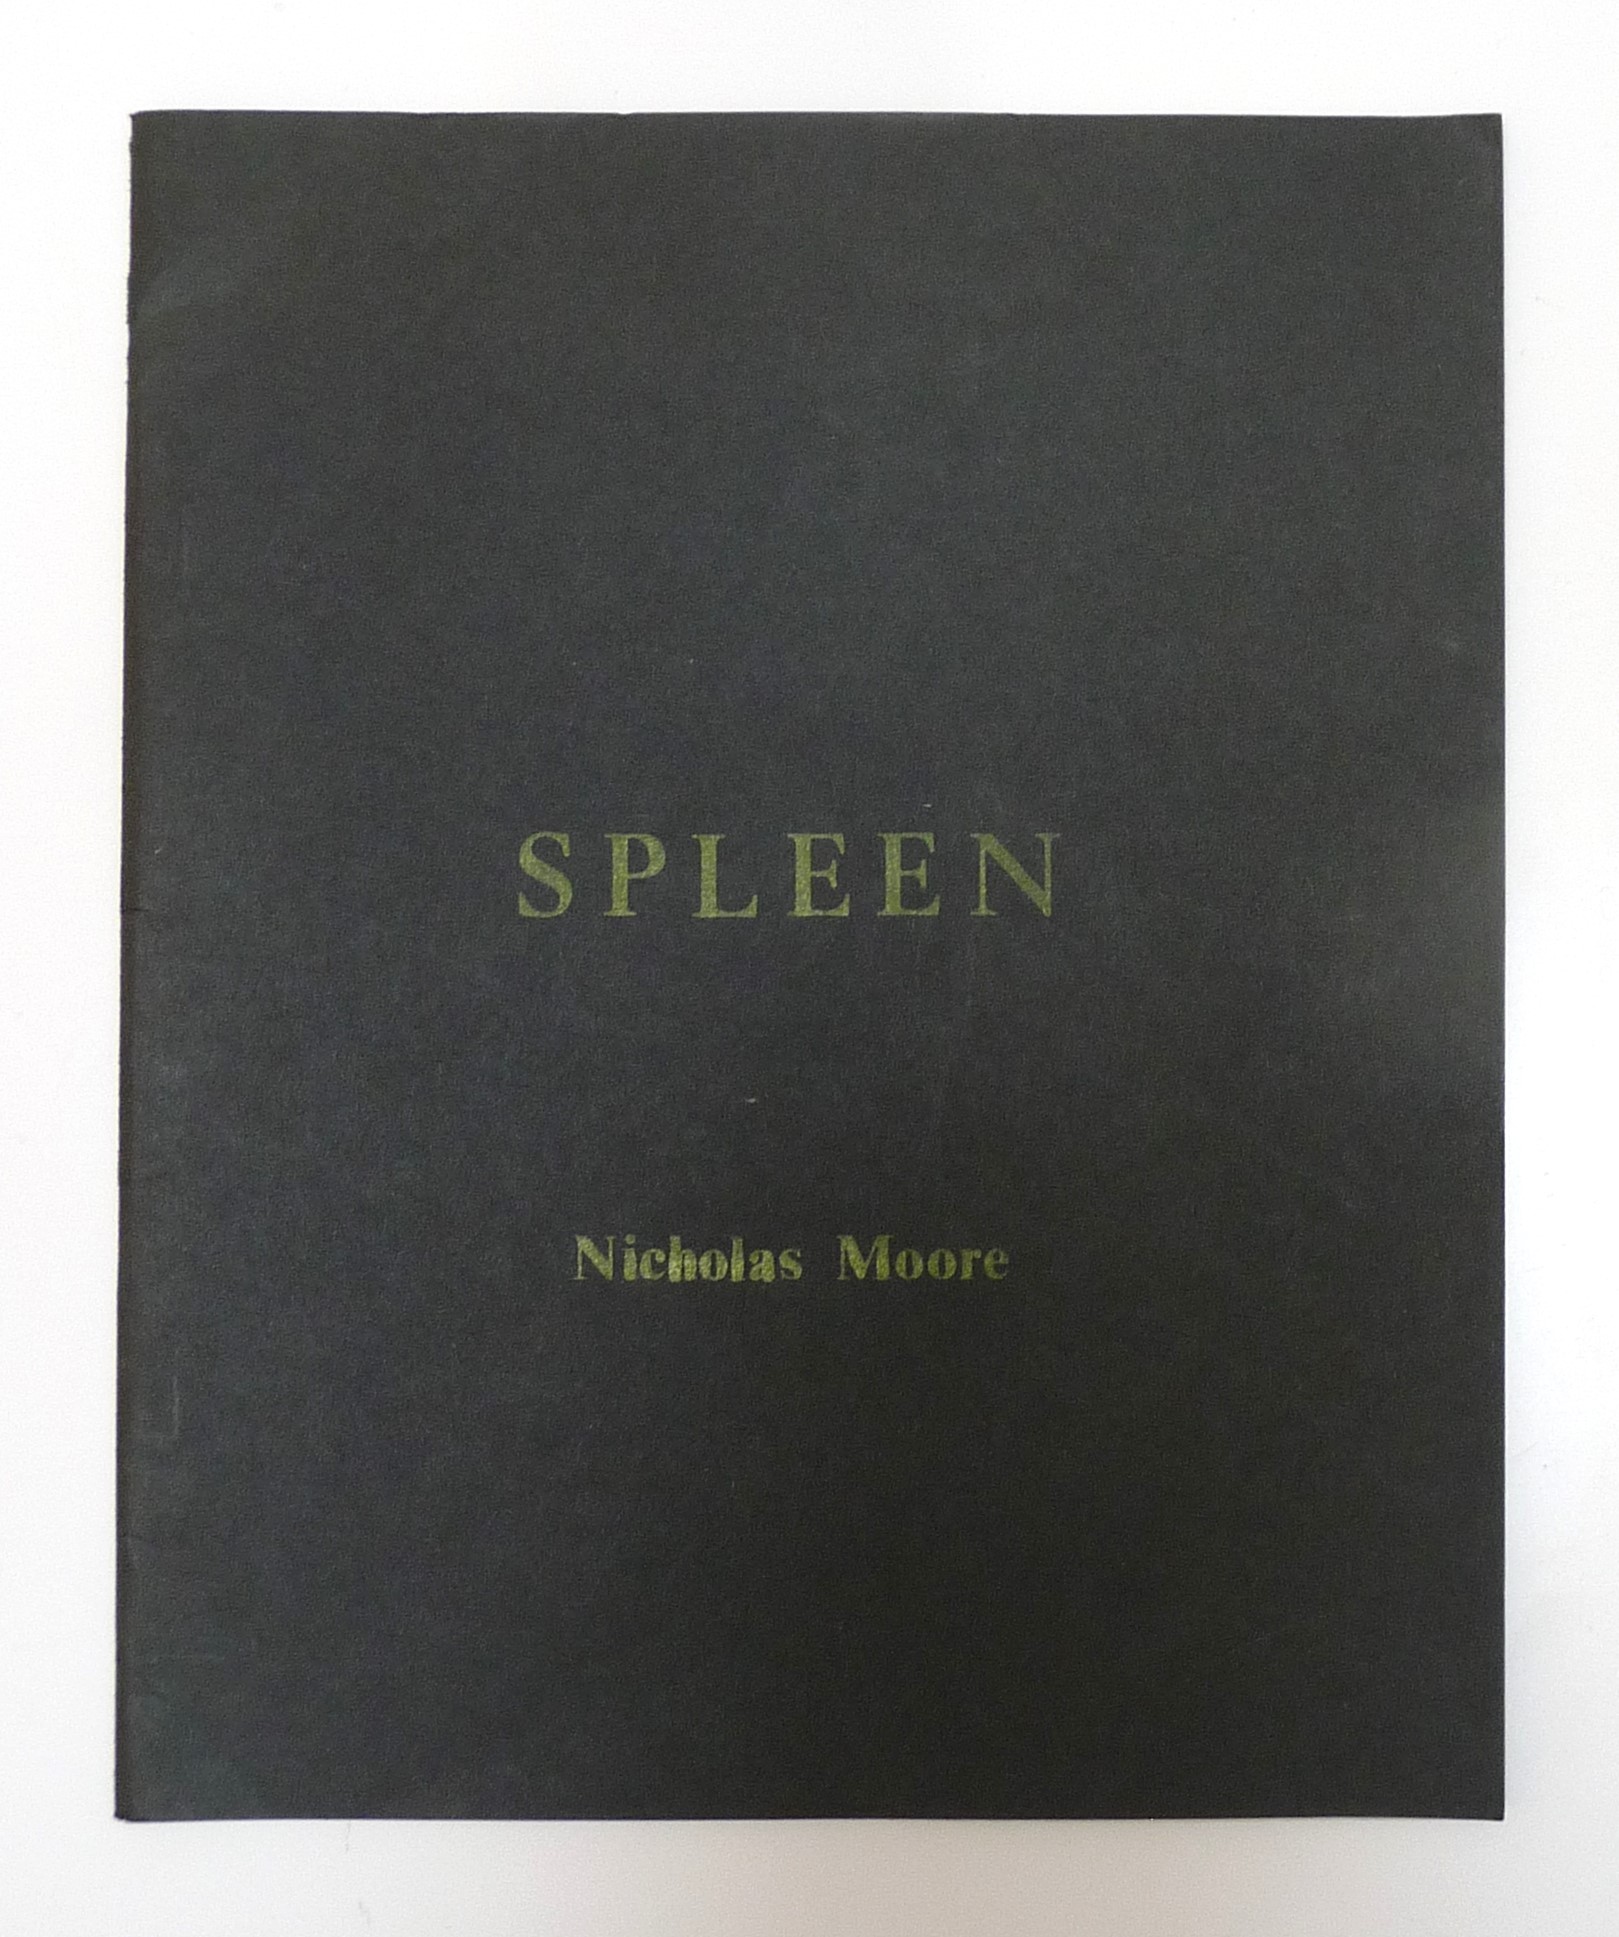 Spleen: Thirty one versions of Baudelaire's Je suis comme le roi by ...